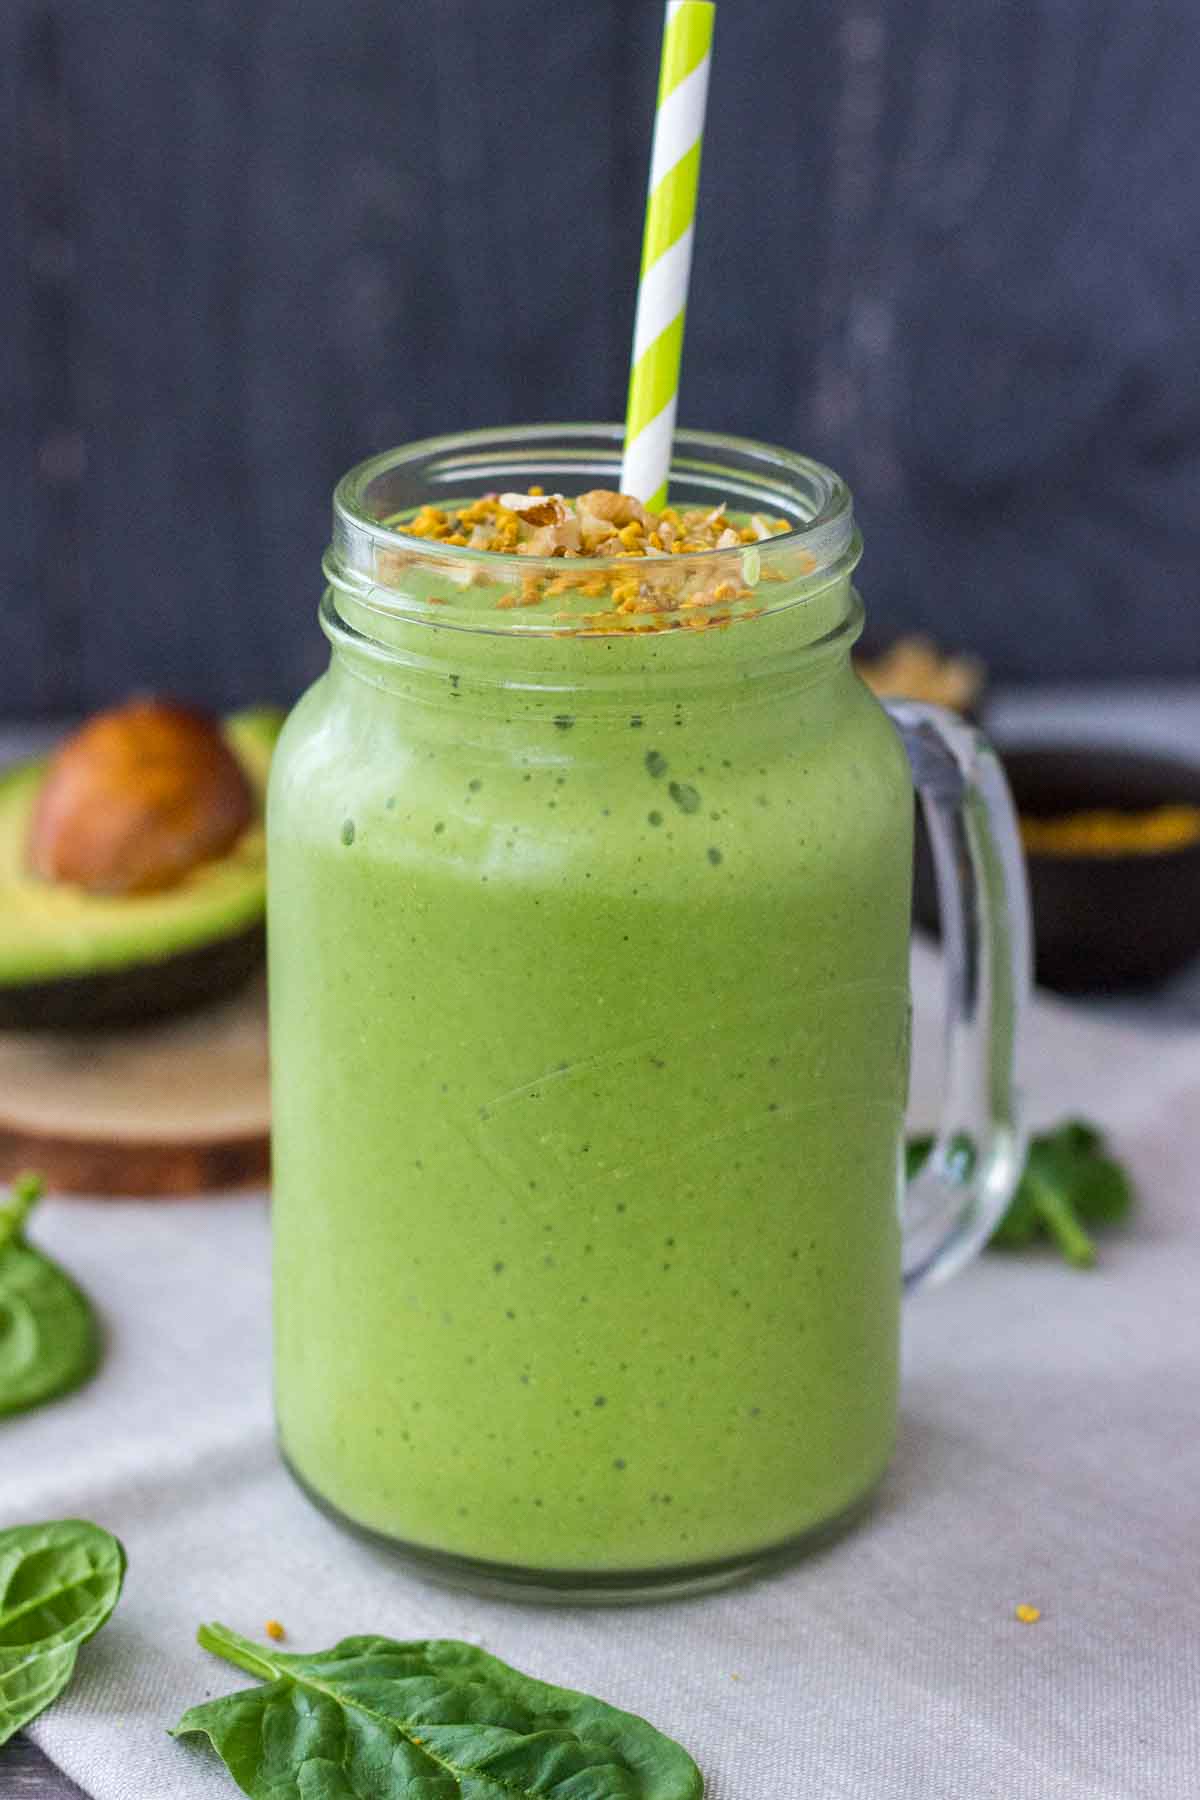 Avocado Smoothie in a glass with a straw